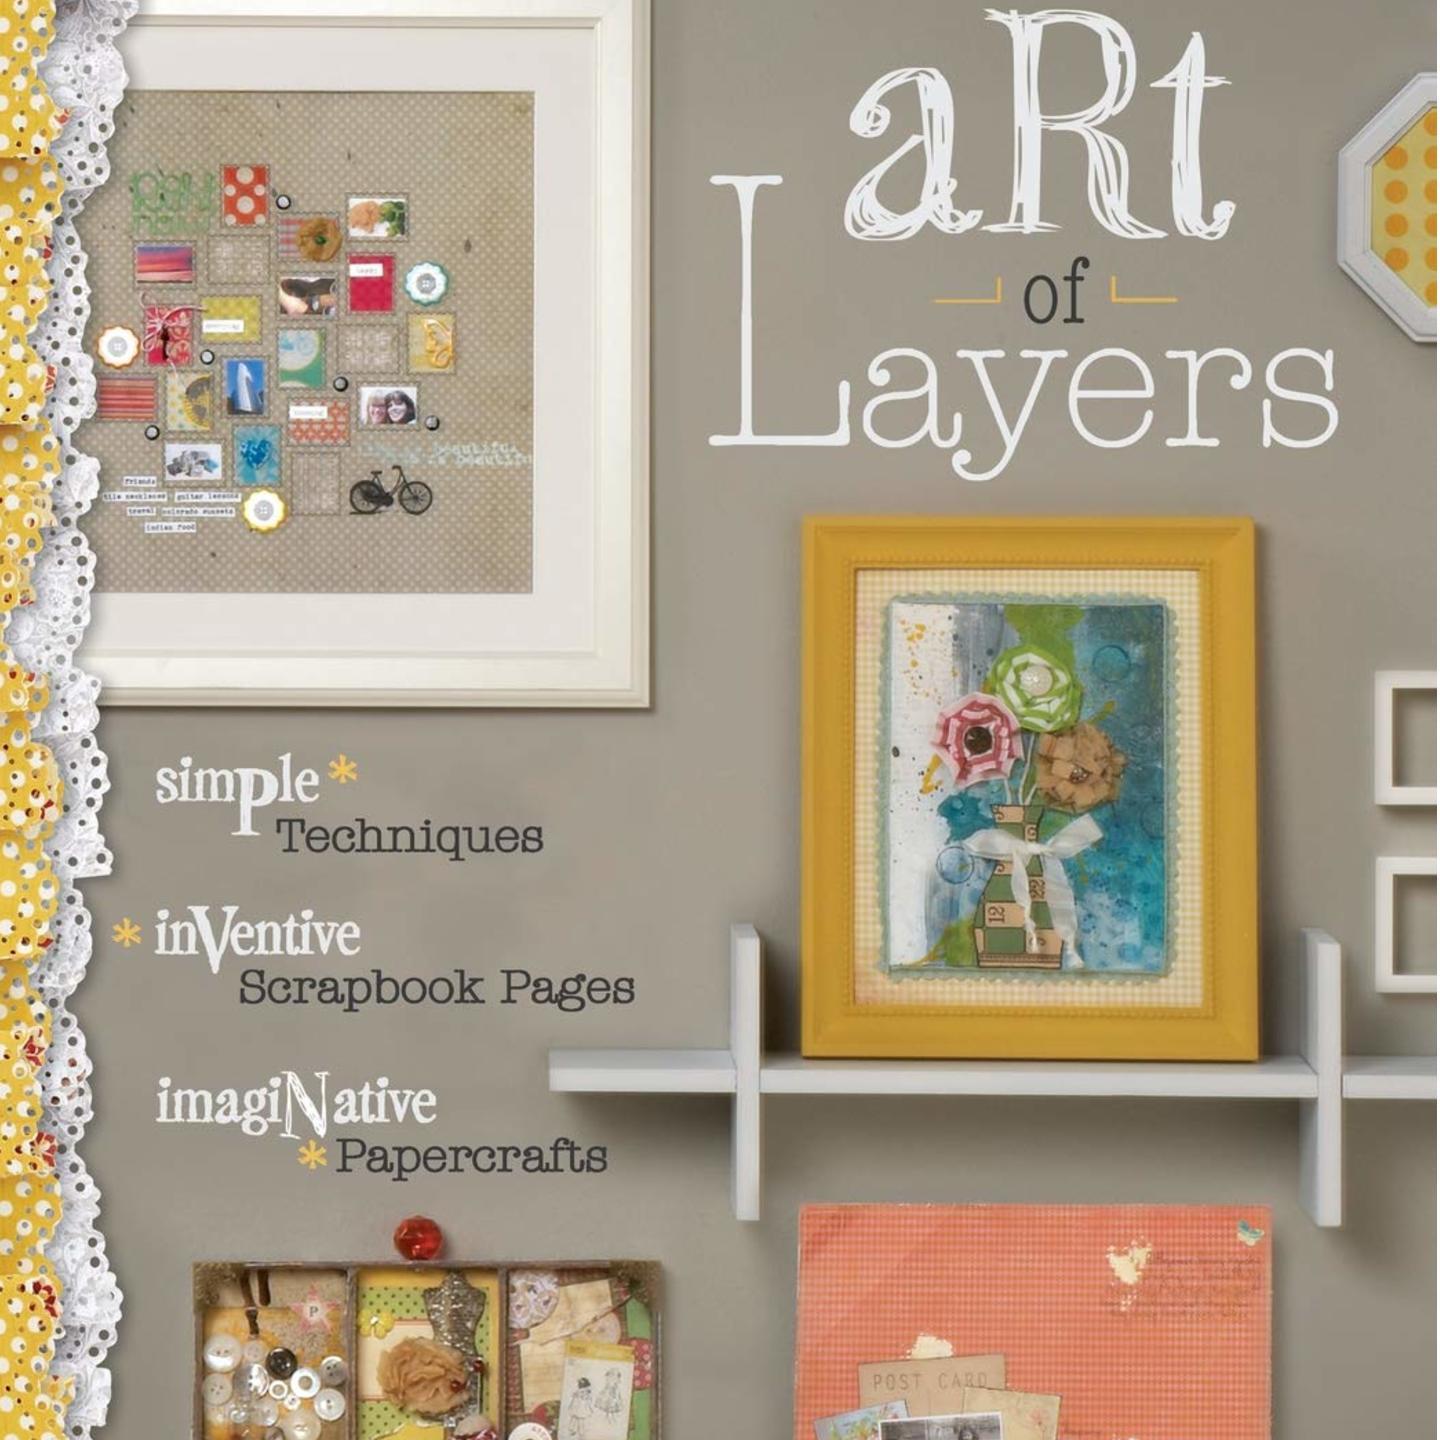 Art of Layers: Simple Techniques, Inventive Scrapbook Pages, Imaginative Papercrafts Paperback – March 22, 2012